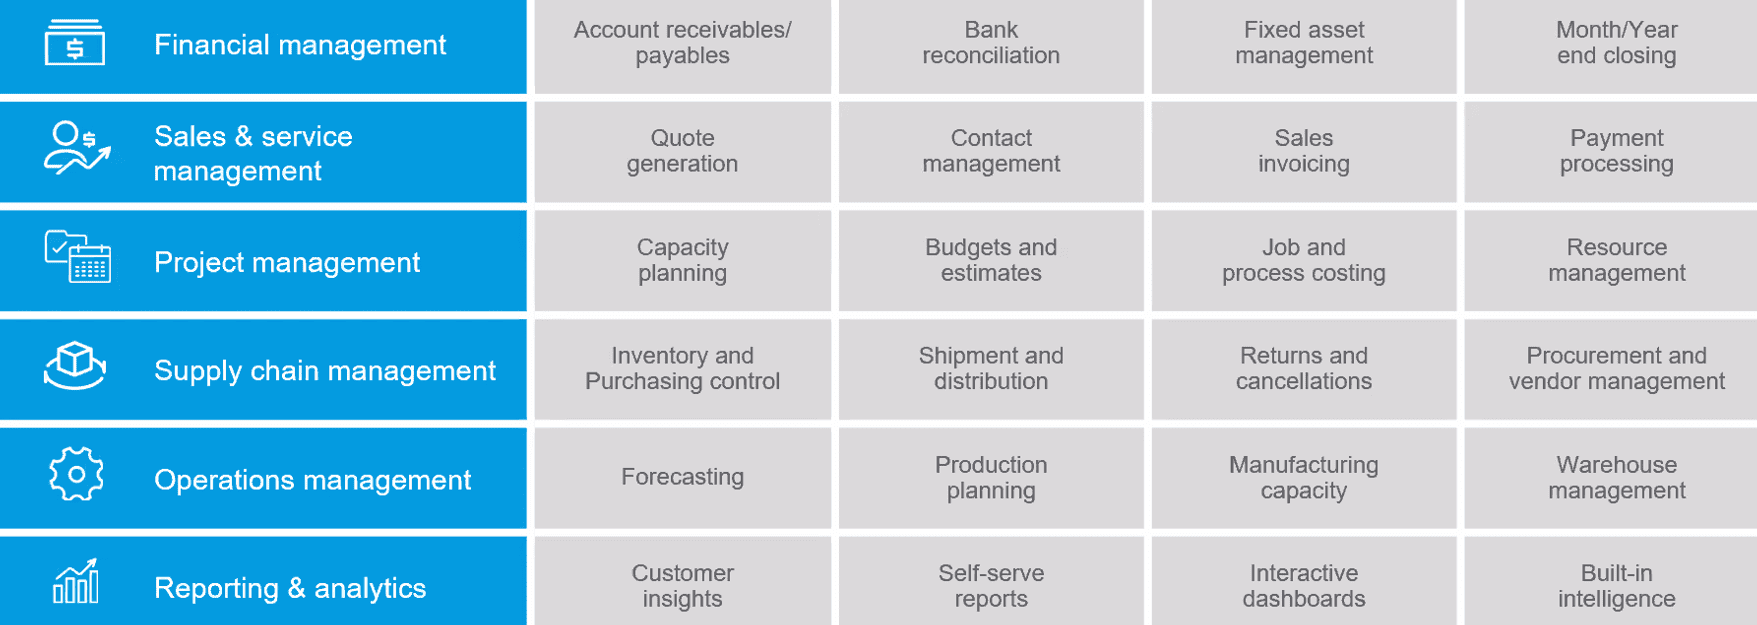 Table showing the summary on how does ERP helps manufacturer's different business functions